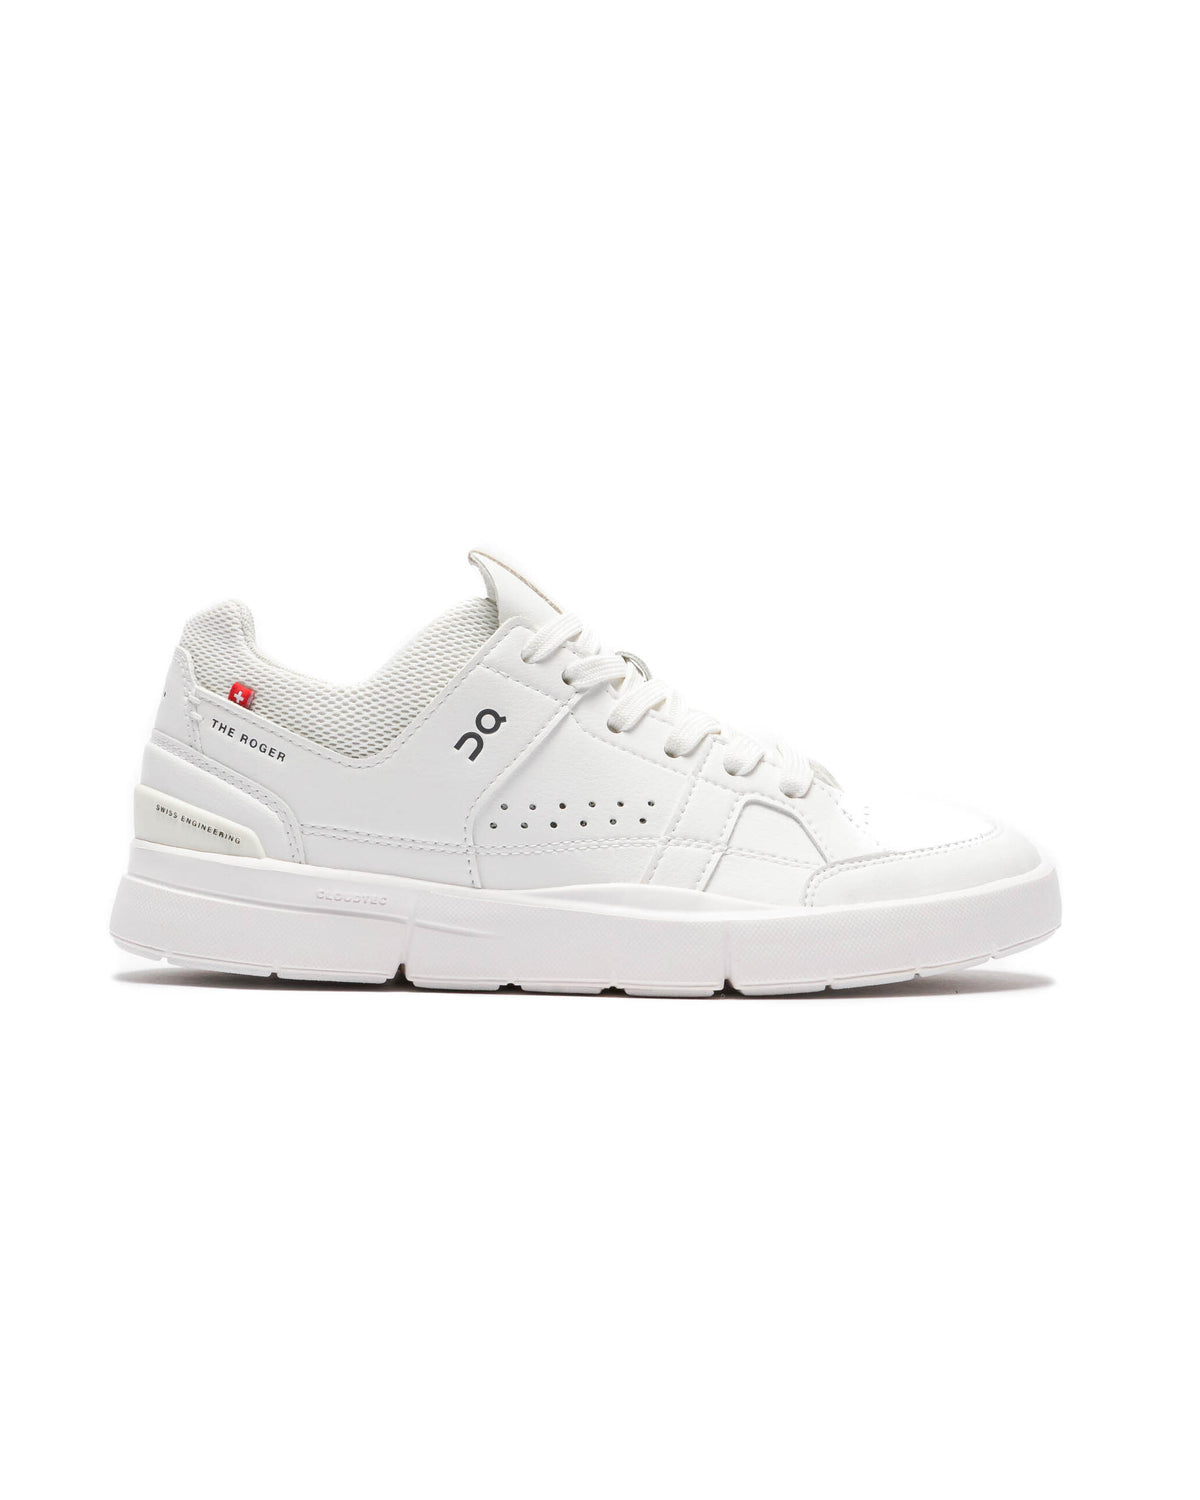 ON WMNS THE ROGER CLUBHOUSE "ALL WHITE"